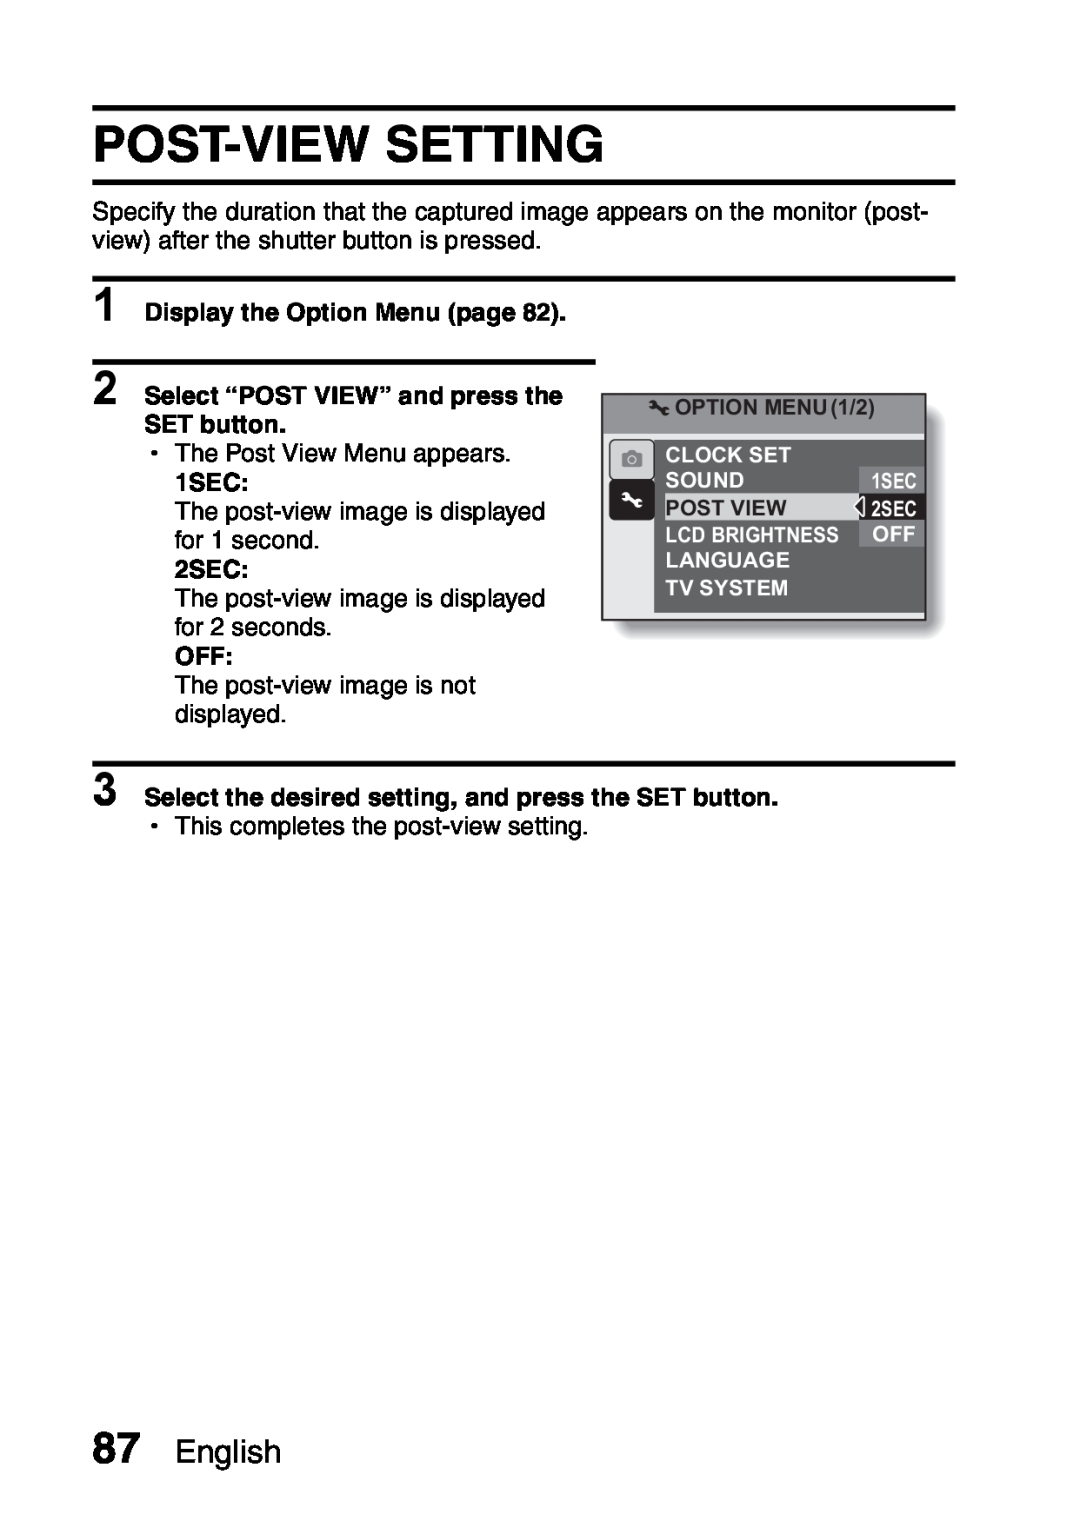 Sanyo VPC-S60 instruction manual Post-View Setting, English, Select “POST VIEW” and press the SET button, 1SEC, 2SEC 